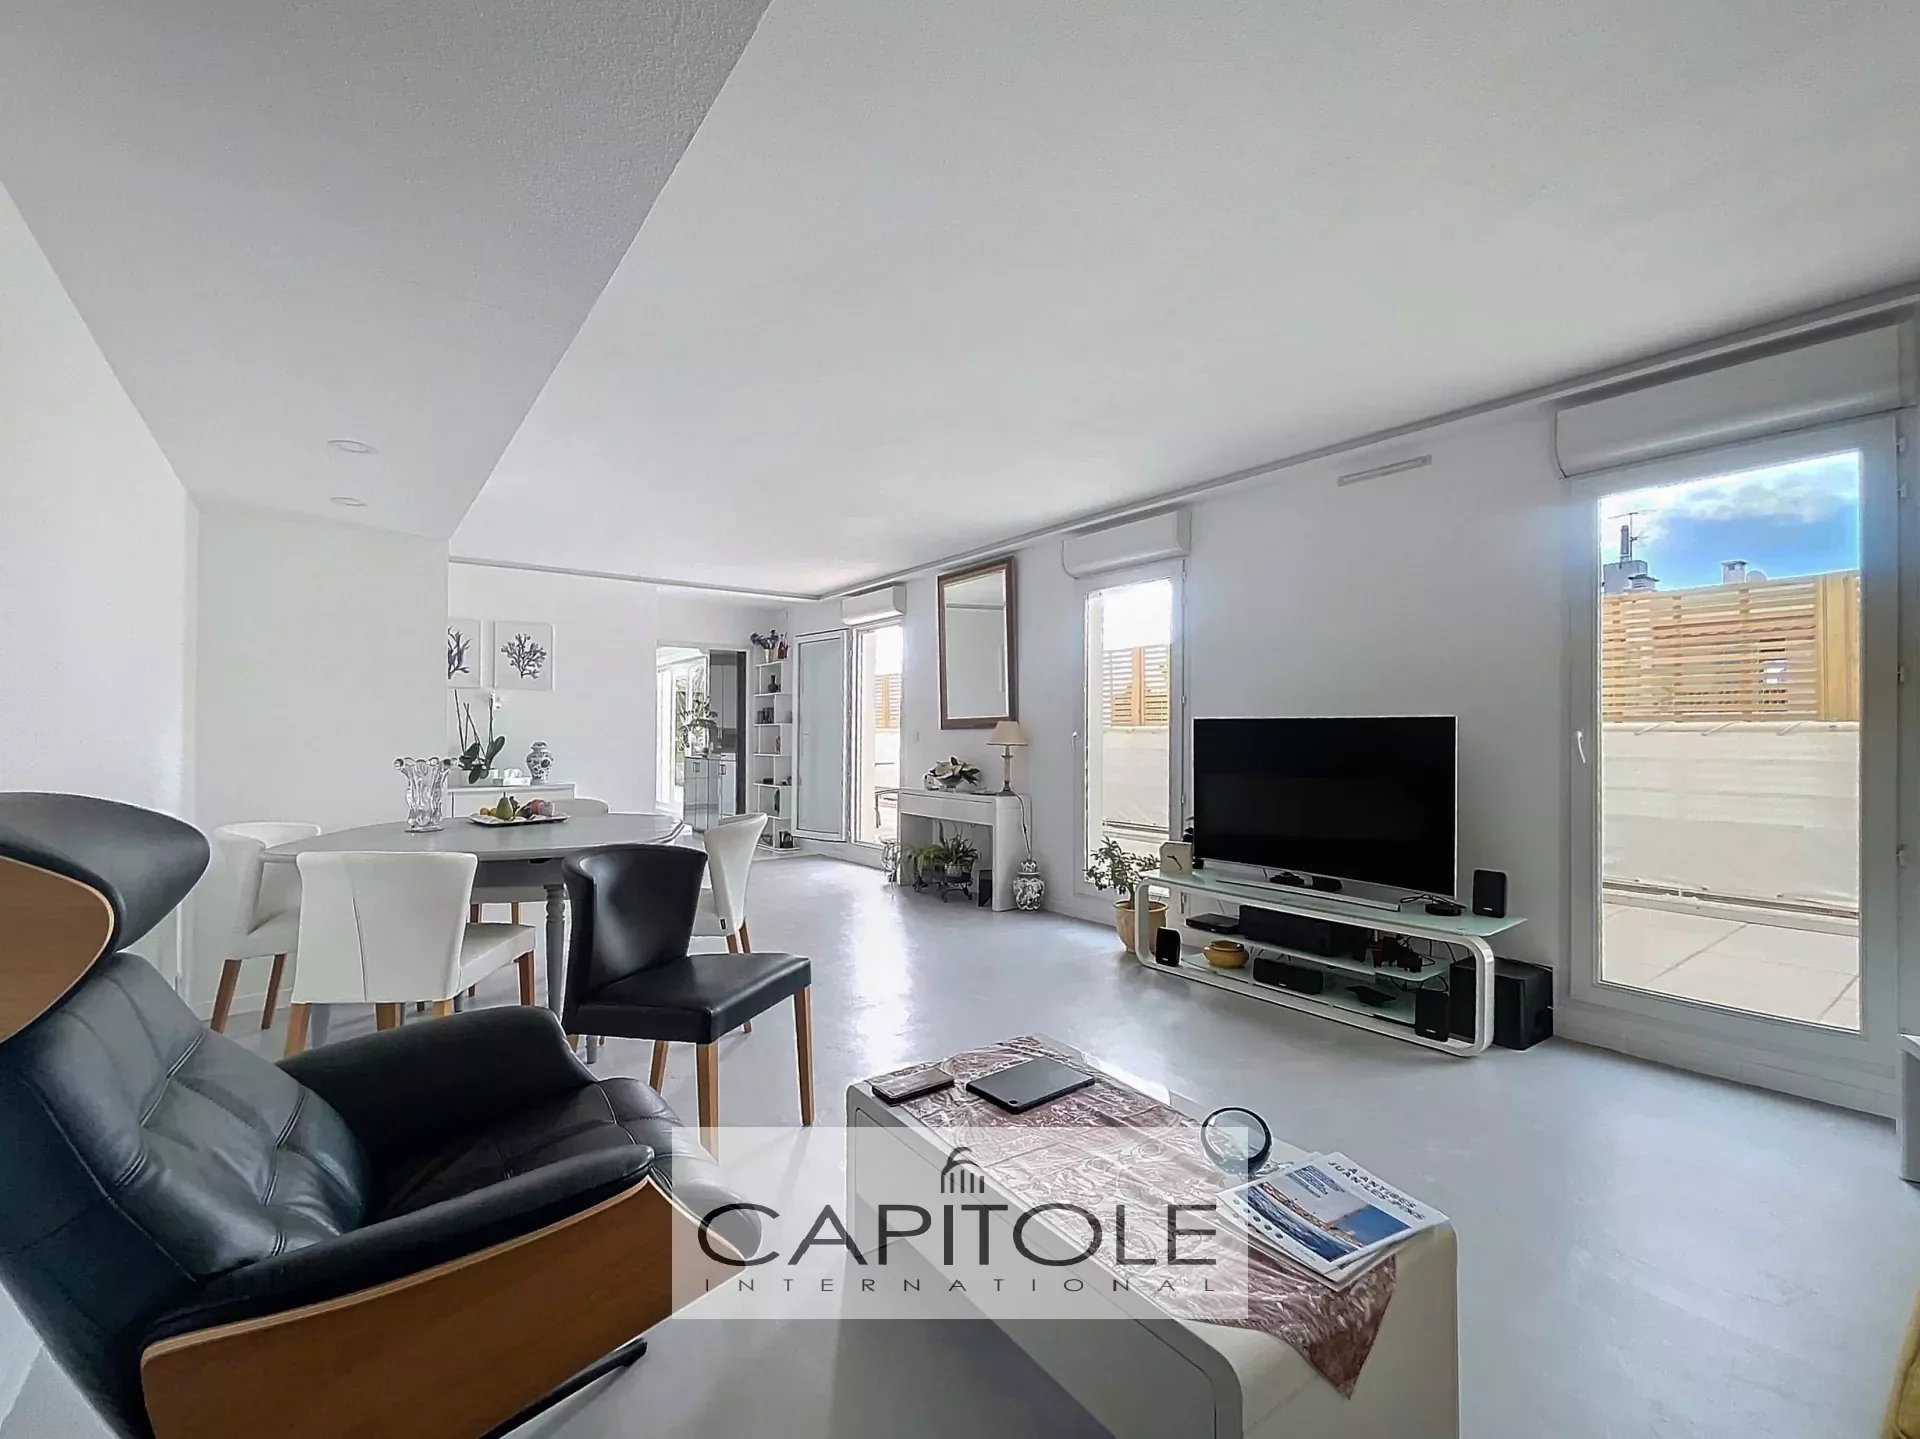 ANTIBES - Penthouse in the City Center of 126 sqm with terrace of  115 sqm.